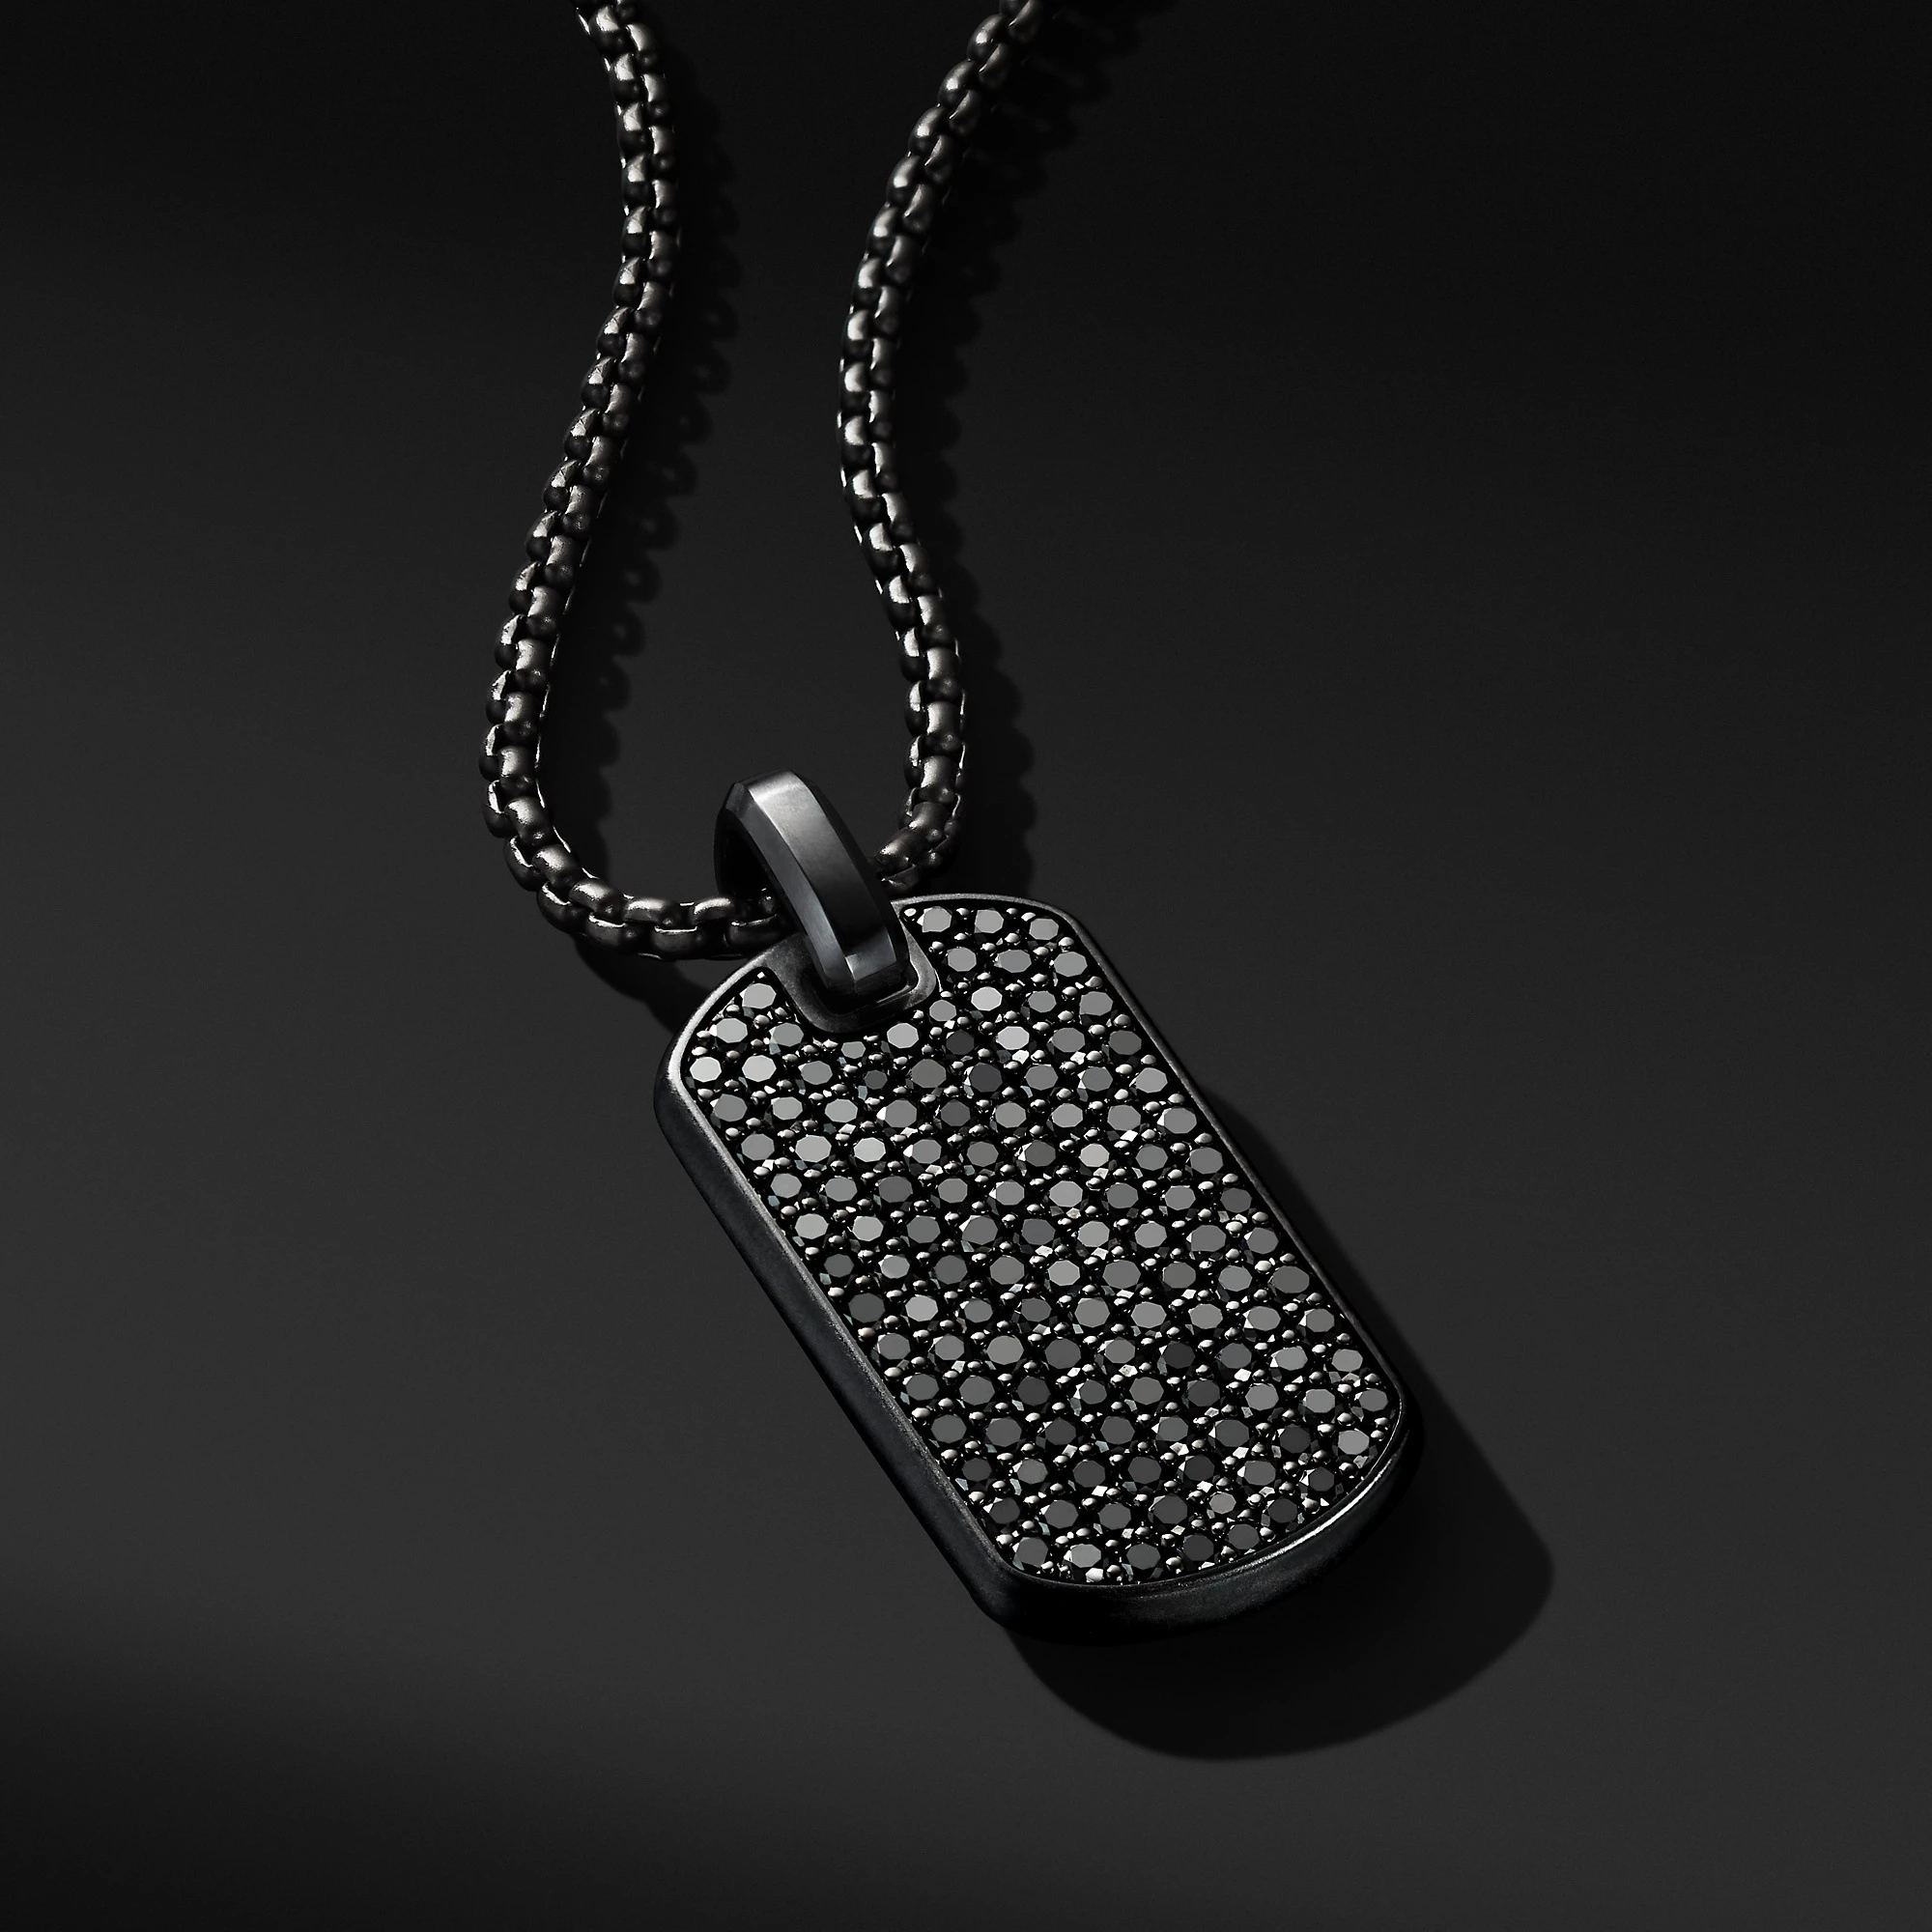 Fashion Jewelry Black Charm Pendant Men Stainless Steel Necklace - Buy ...